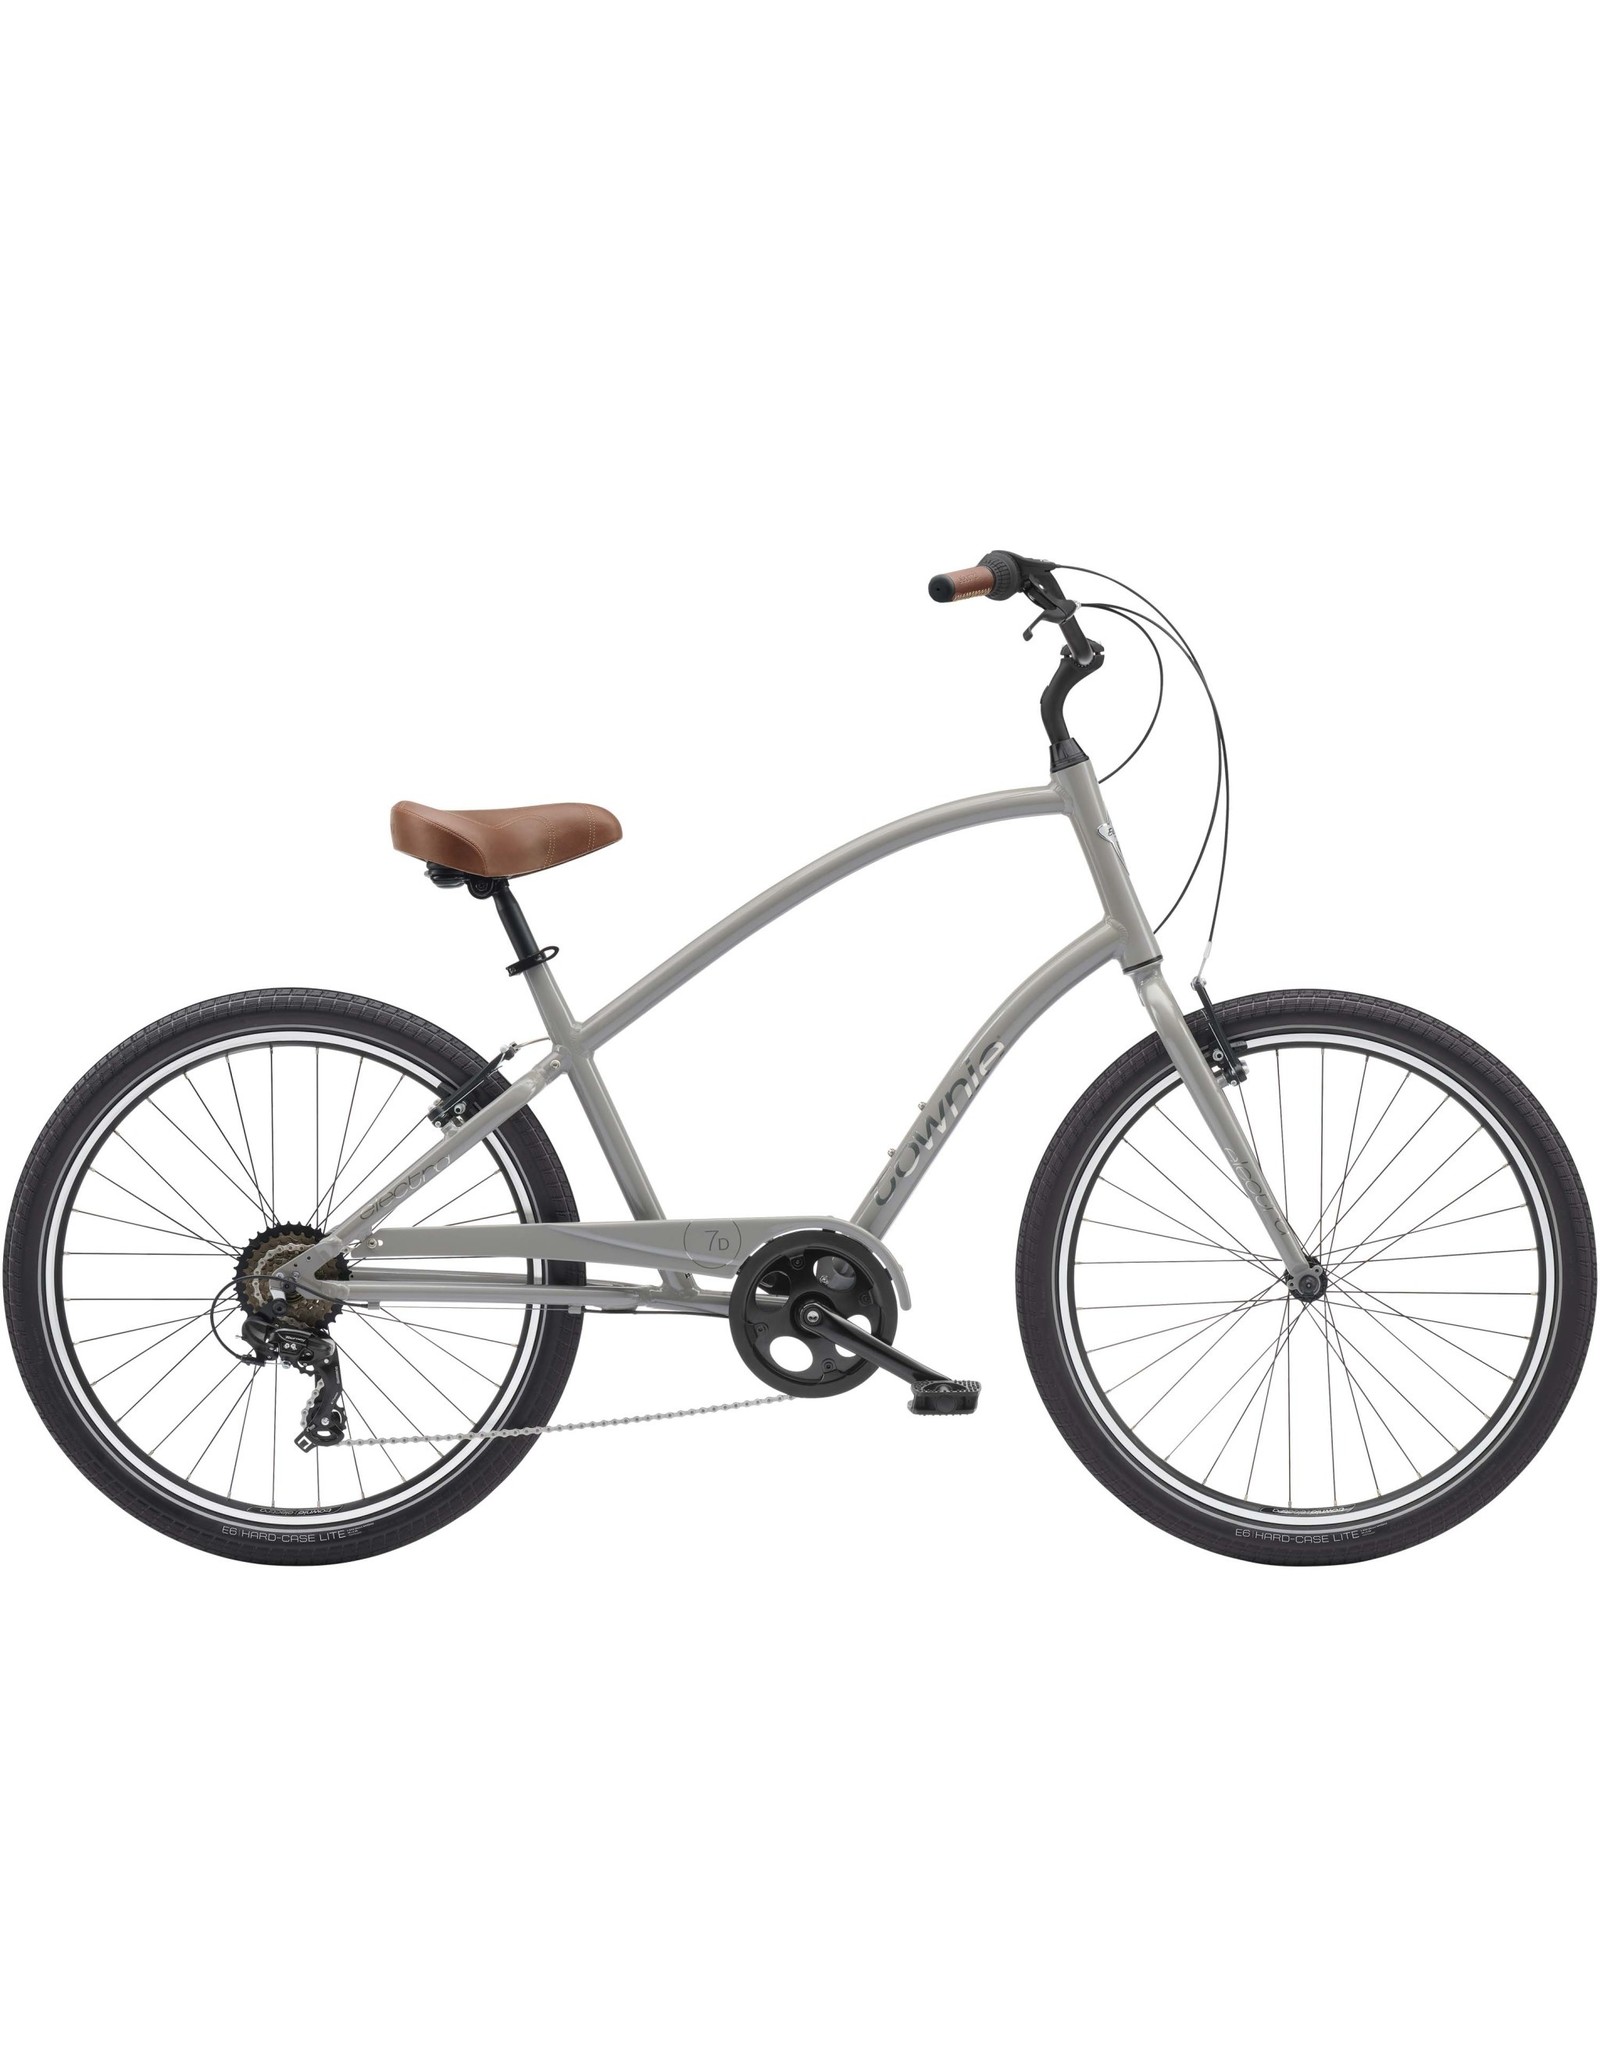 Townie Electra Townie 7D Step-Over